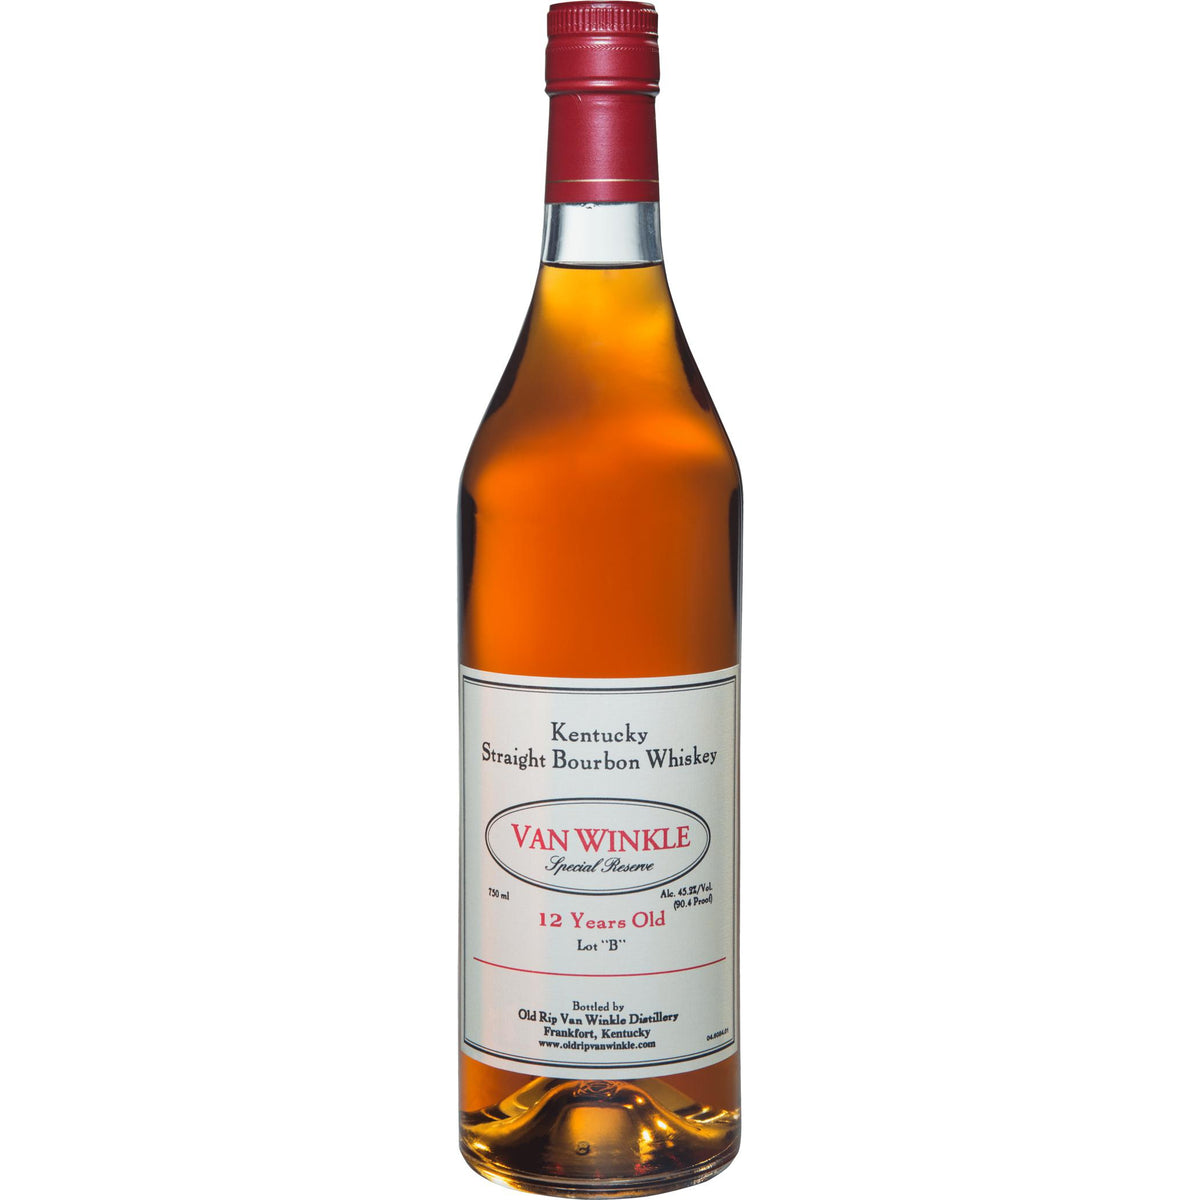 Van Winkle Special Reserve Kentucky Straight Bourbon Whiskey 12 Year Old